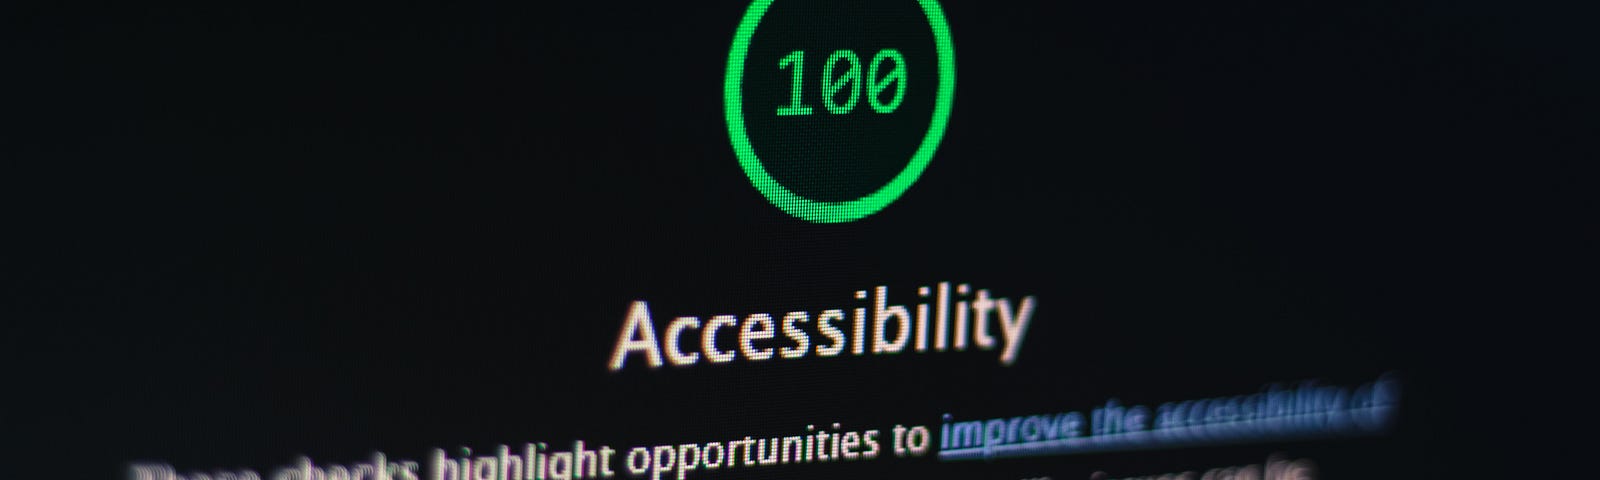 how to make your site more accessible